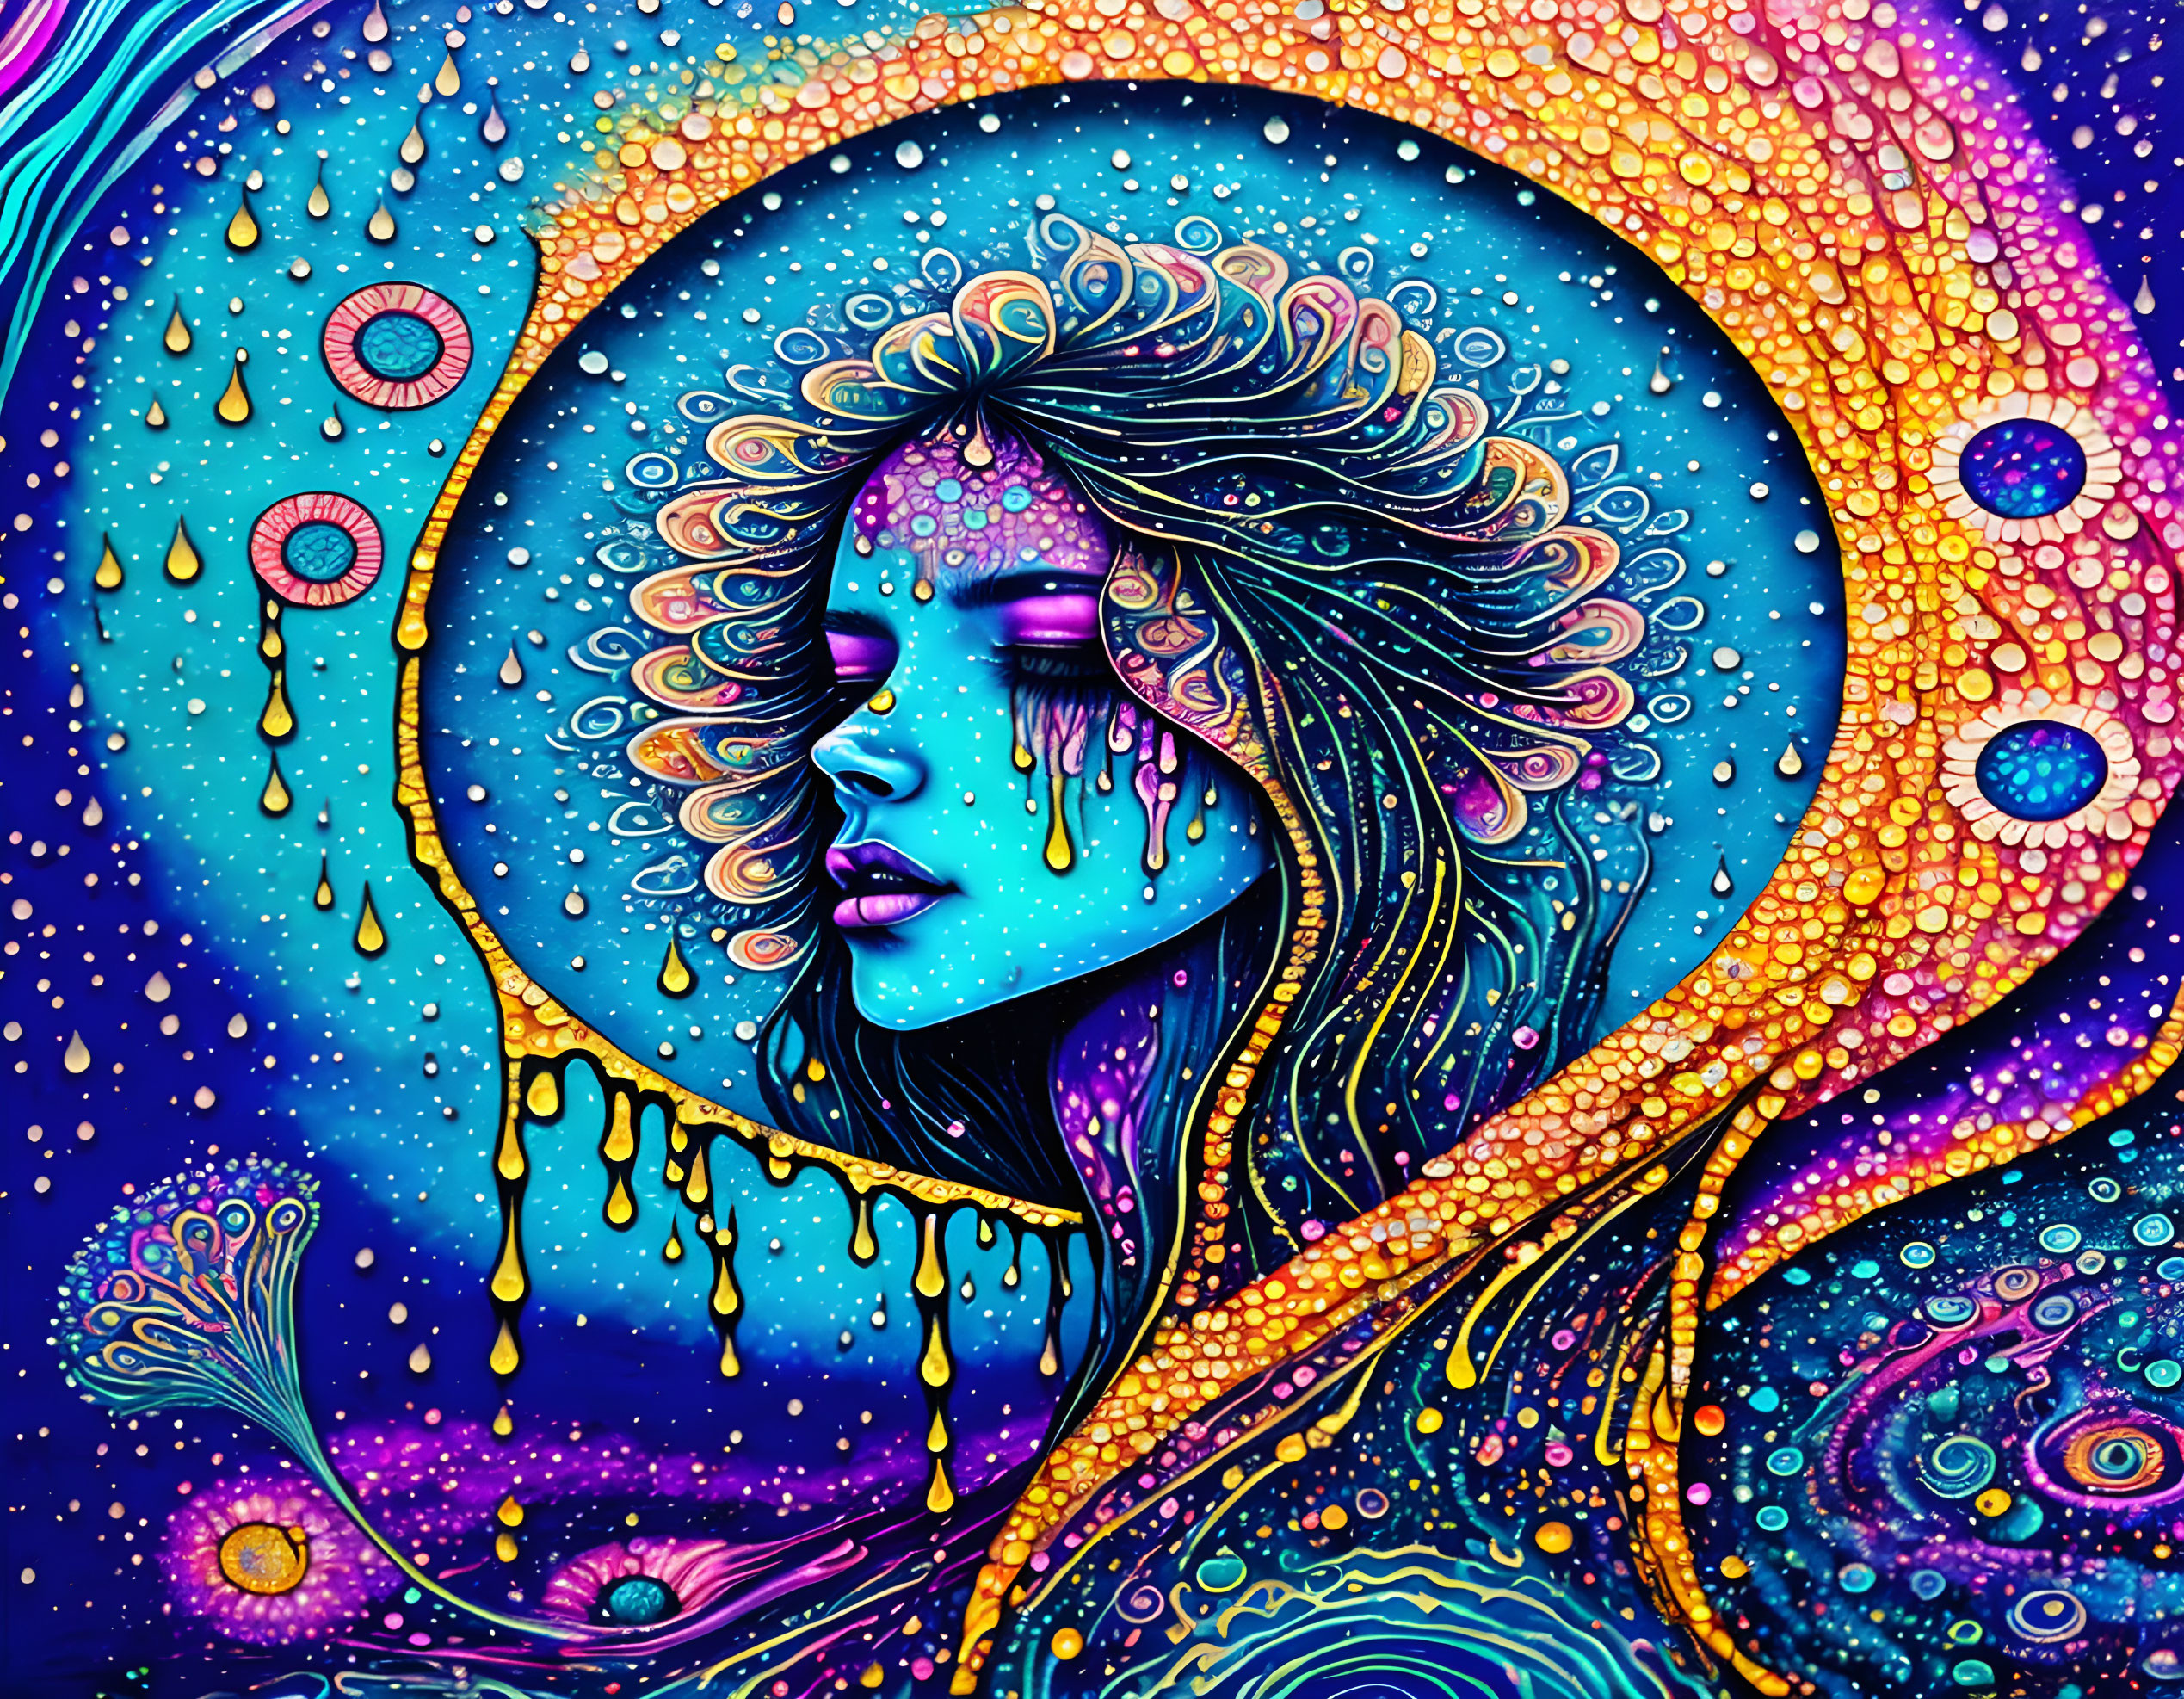 Colorful cosmic aura surrounds woman with closed eyes in vibrant artwork